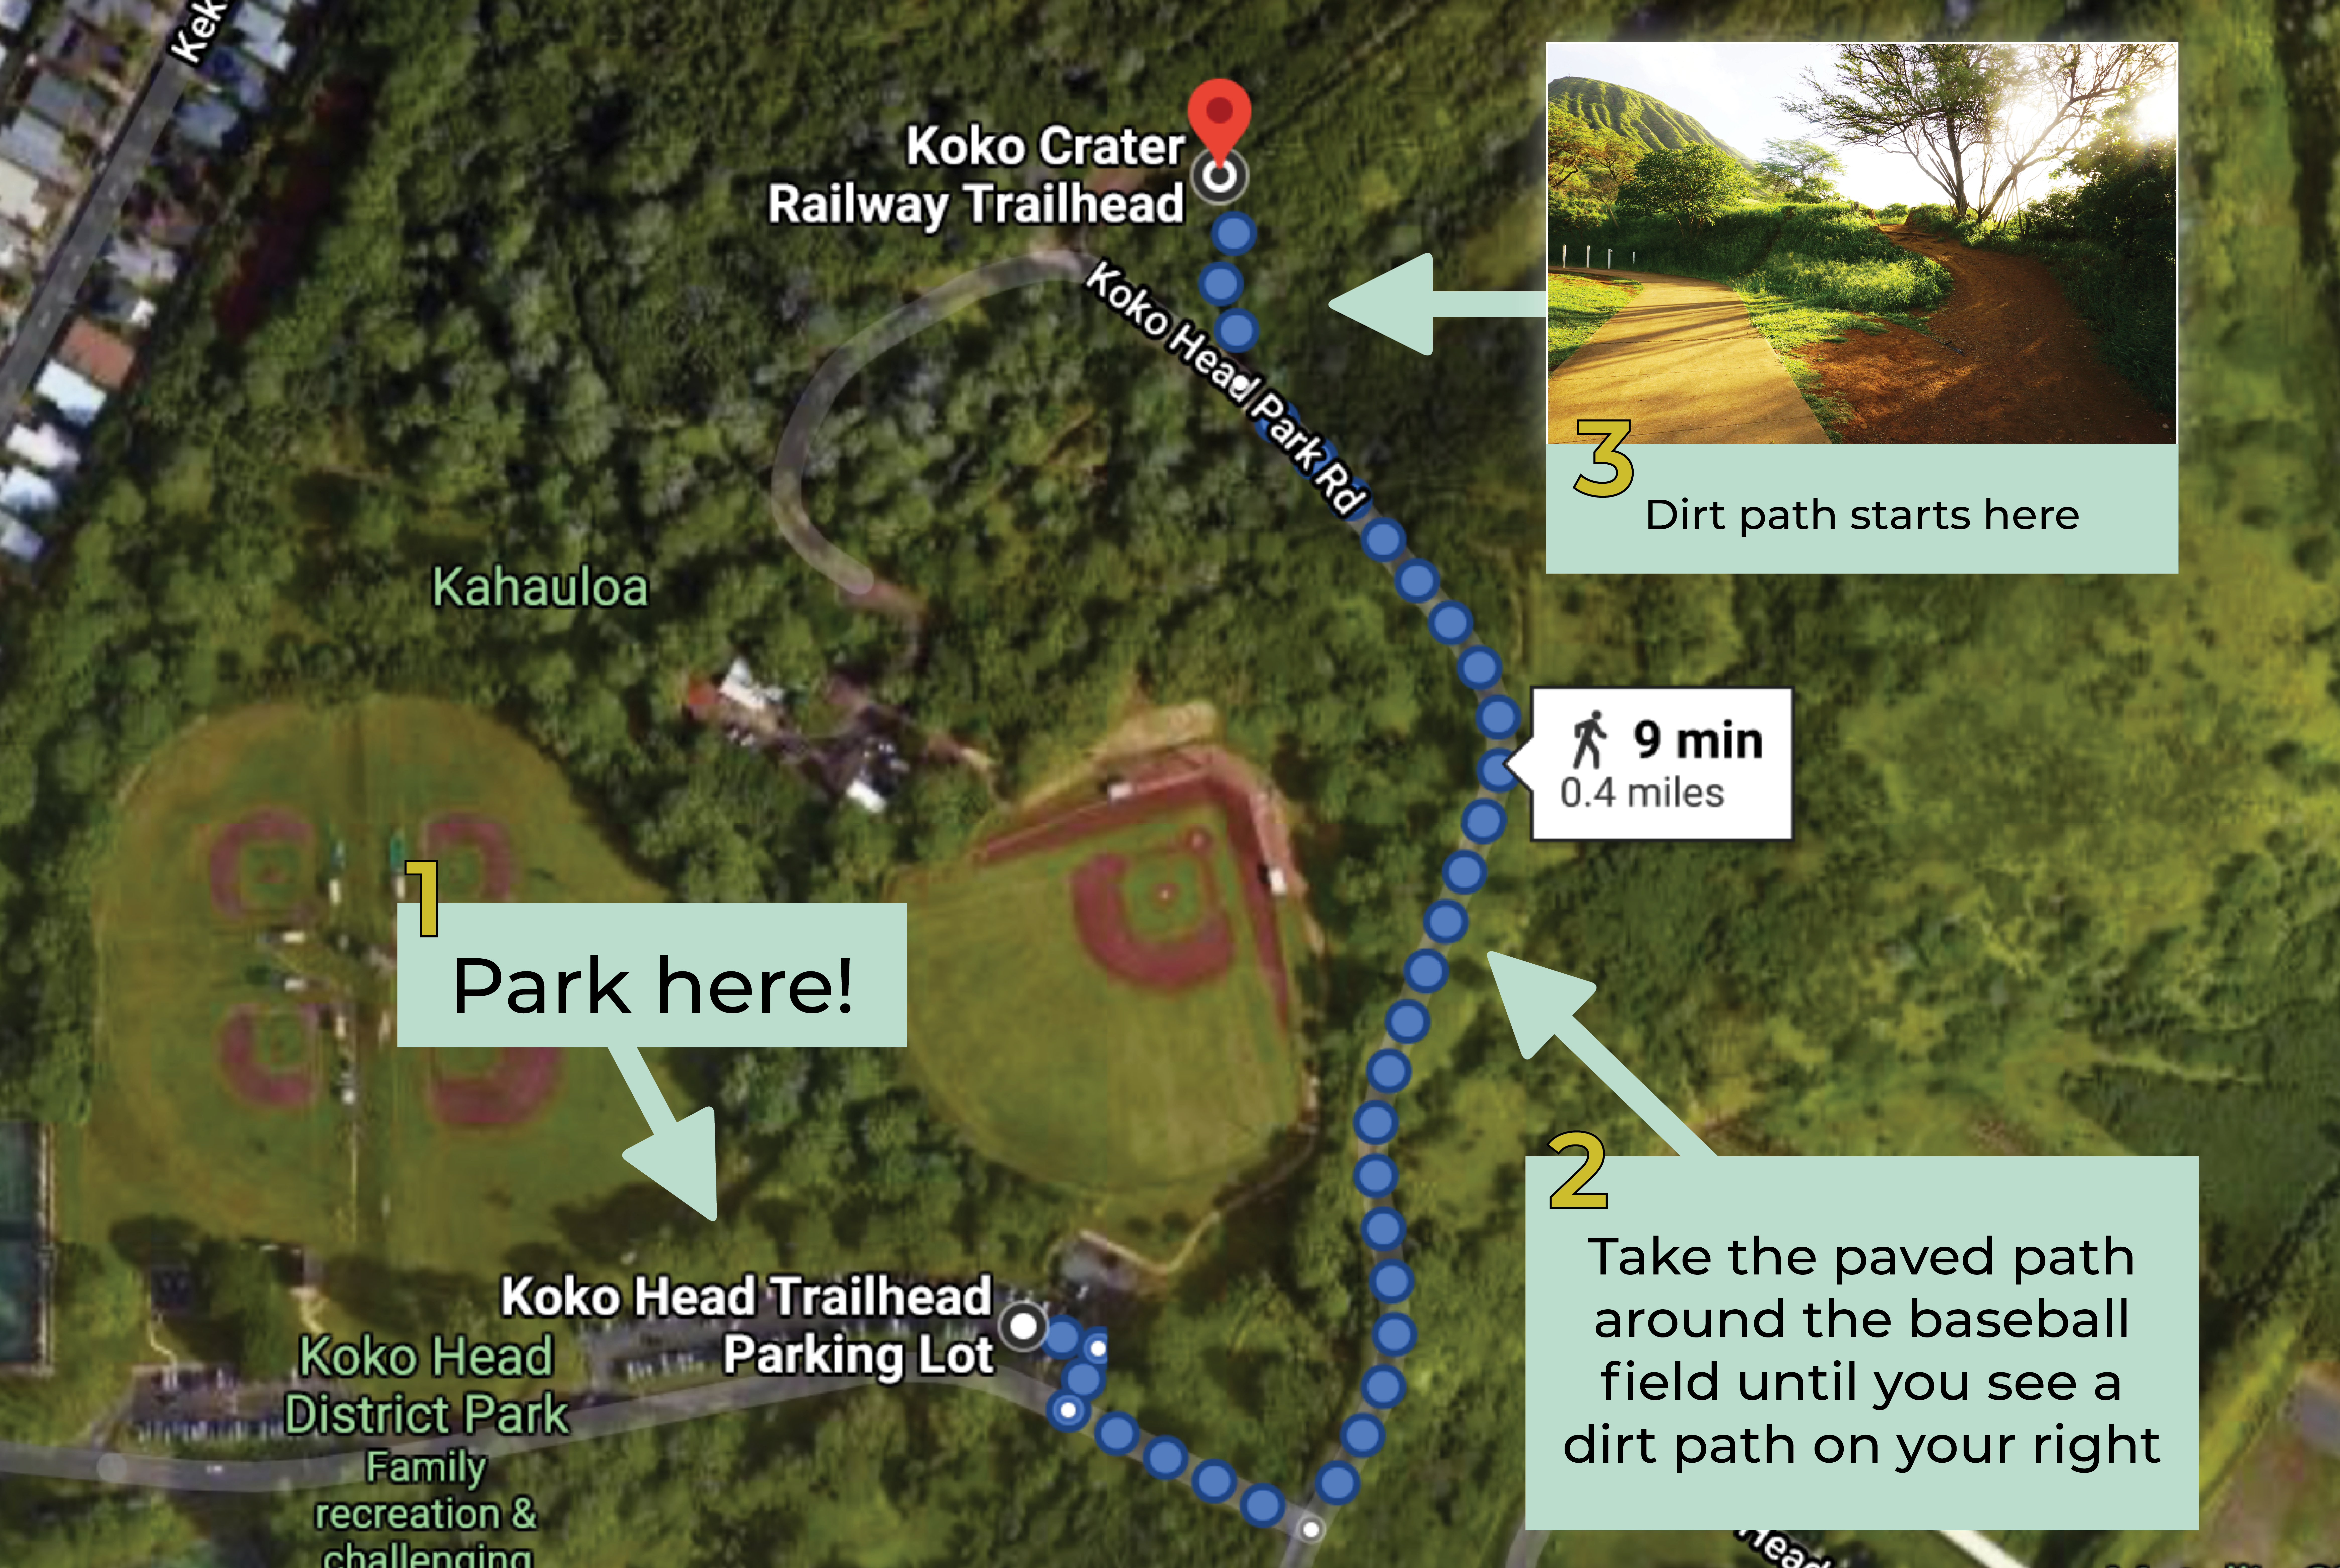 Guide map showing where to park and the path to the Koko Head Crater Stairs trailhead